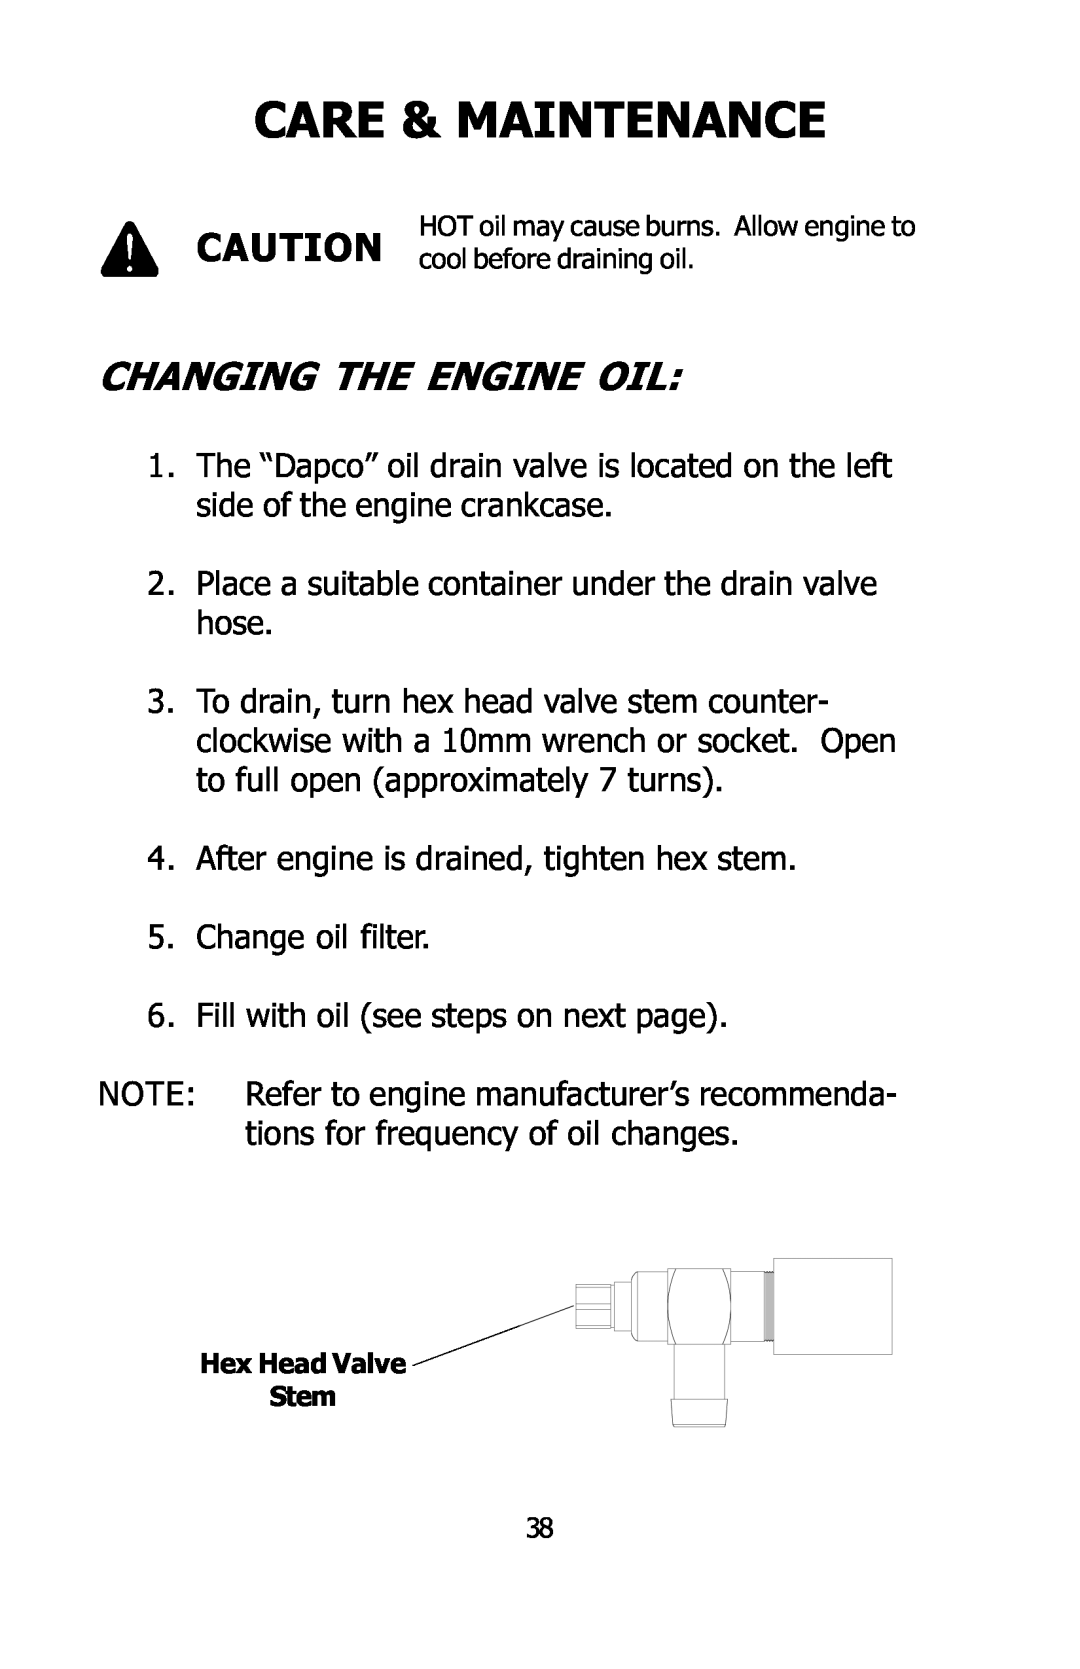 Dixon 16134-0803 manual Care & Maintenance, Changing The Engine Oil 